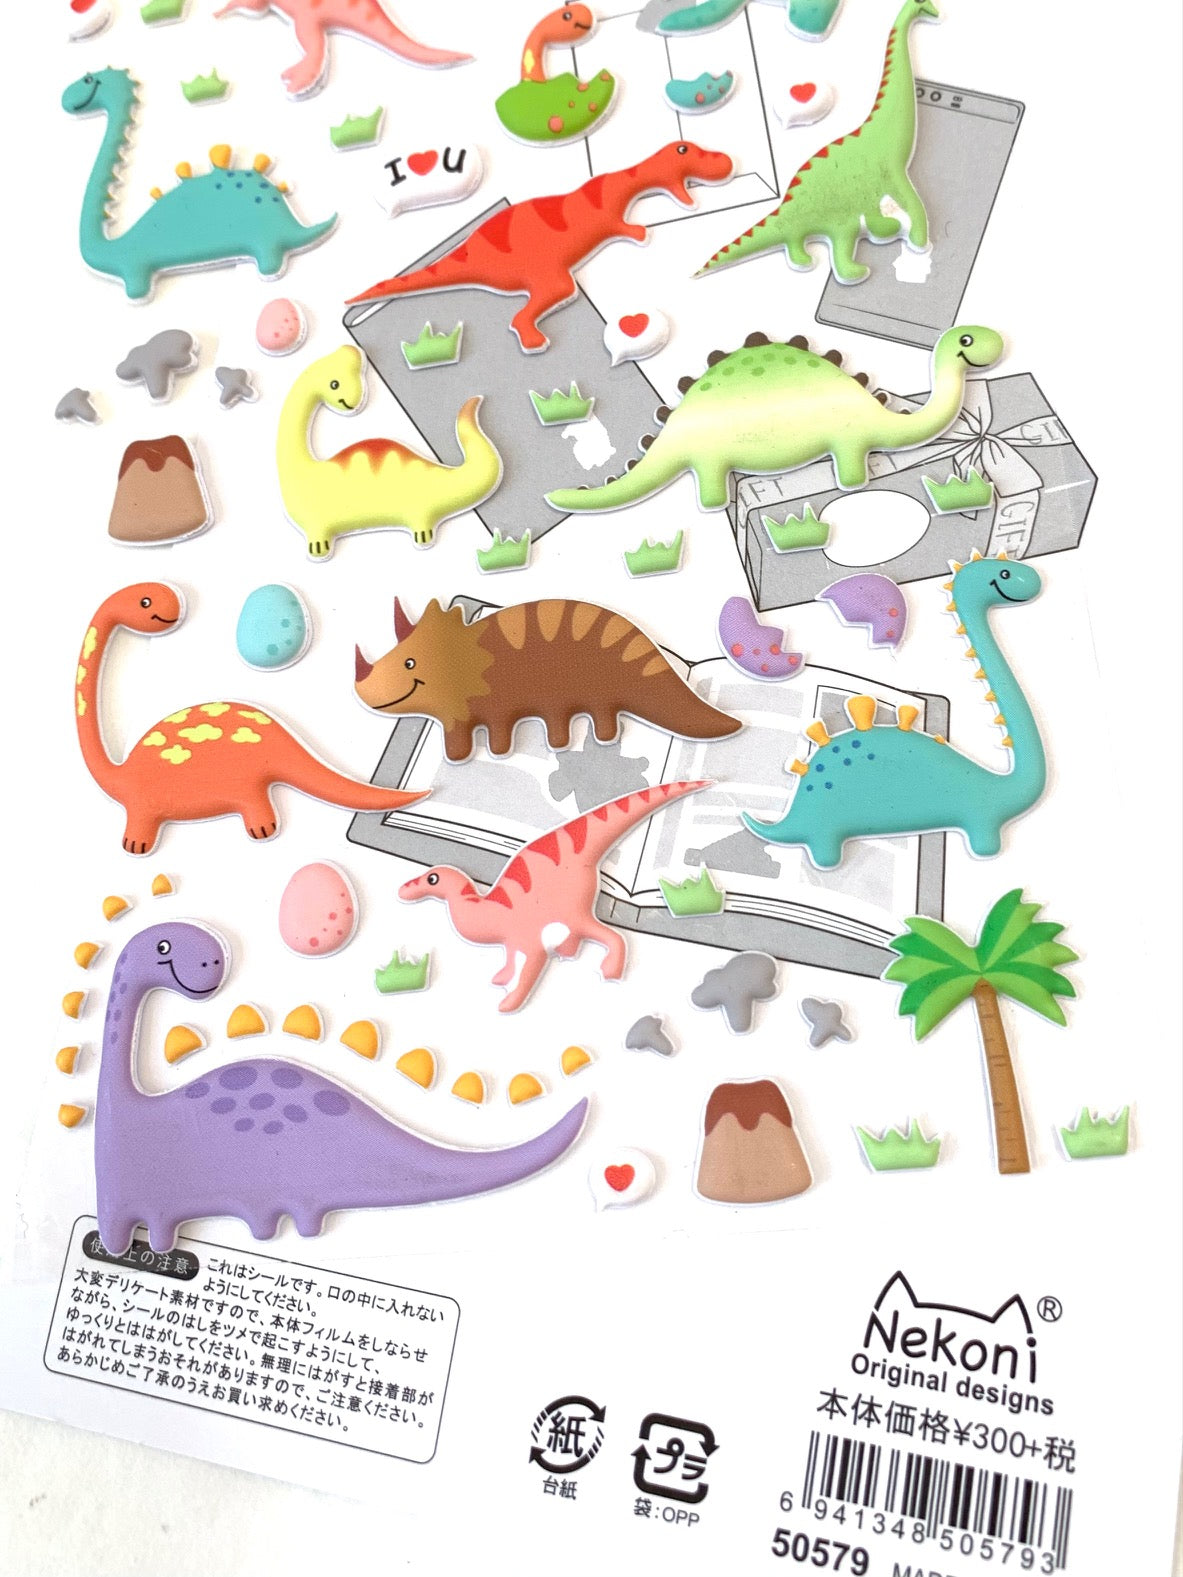 Dinosaur Puffy Stickers - Wit & Whimsy Toys